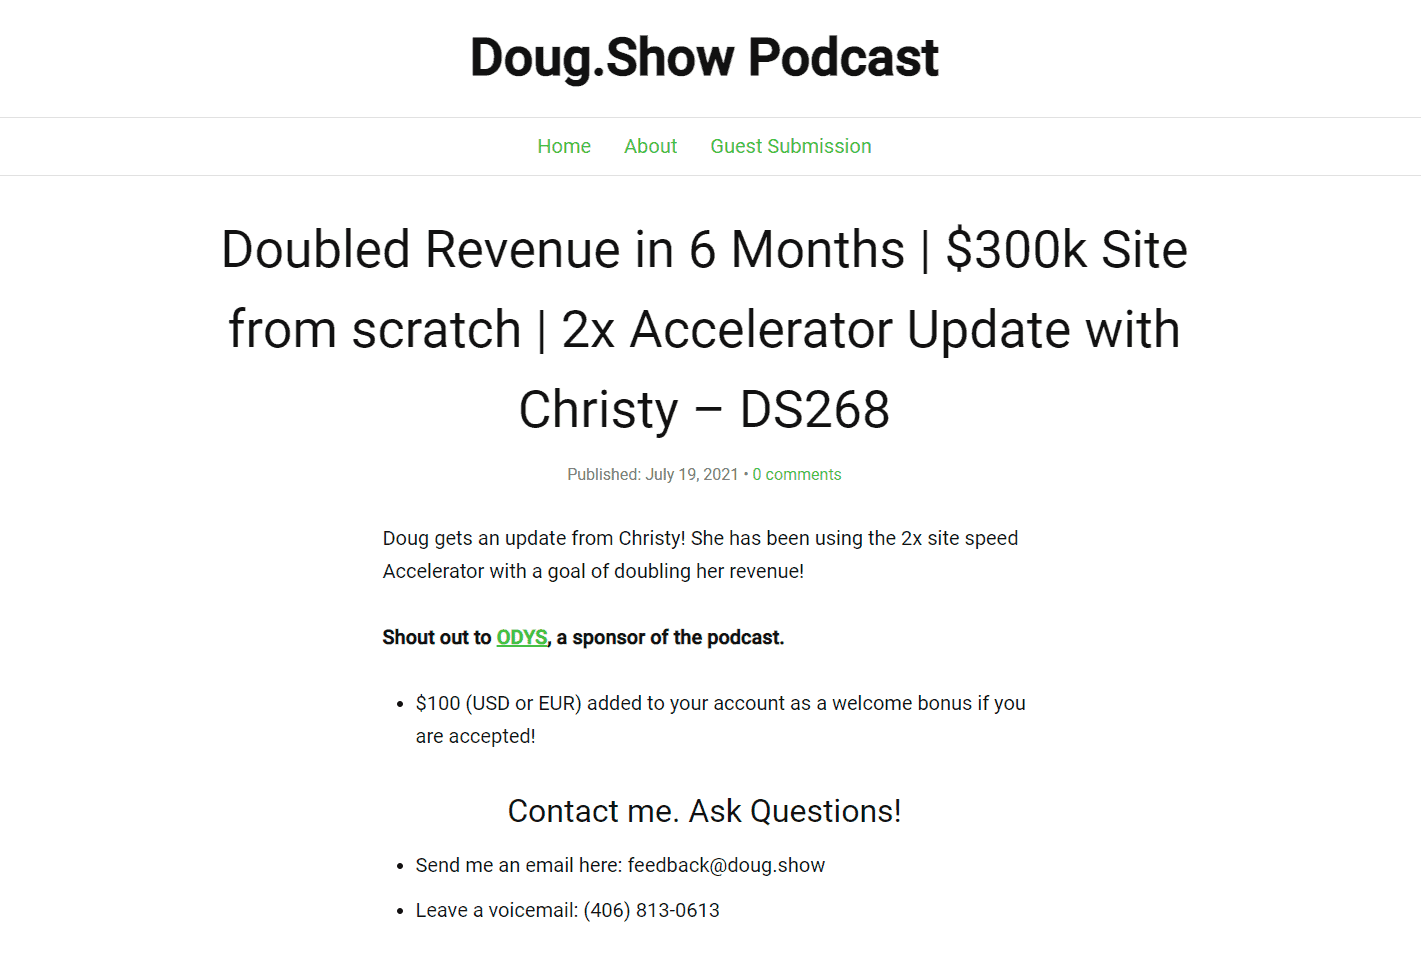 dougshow podcast